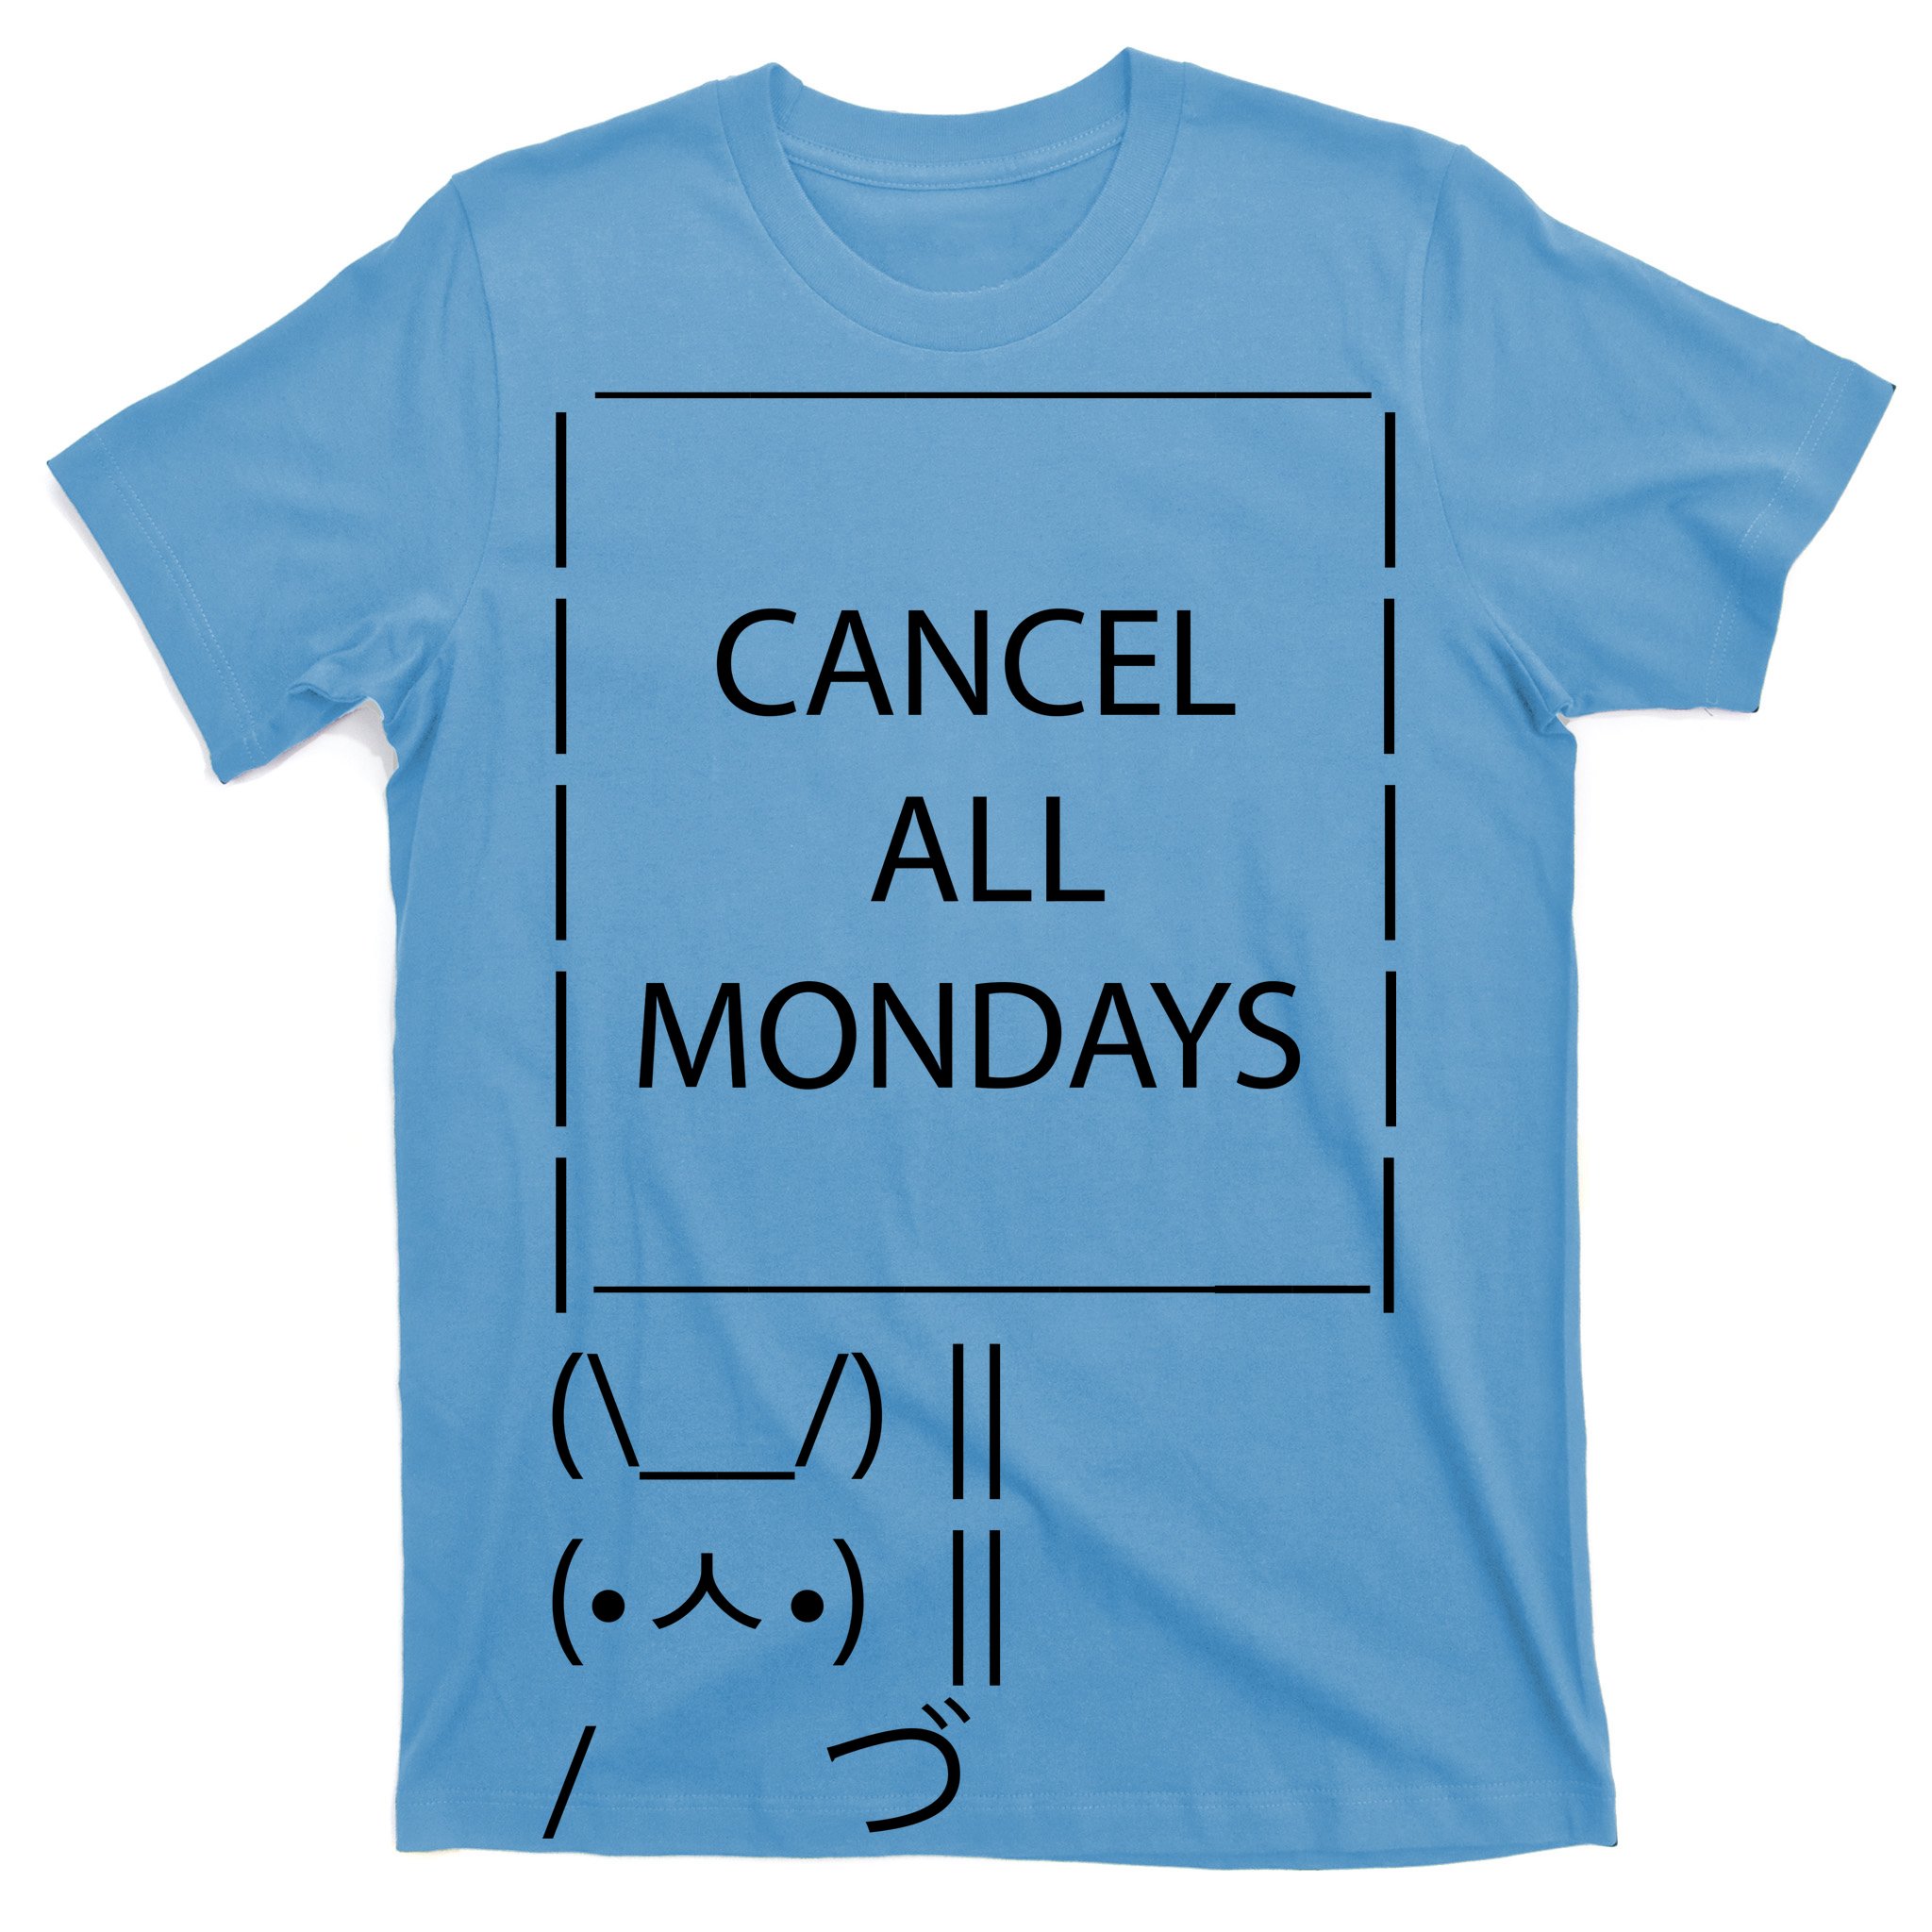 https://images3.teeshirtpalace.com/images/productImages/ascii-bunny-cancel-all-mondays--skyblue-at-garment.jpg